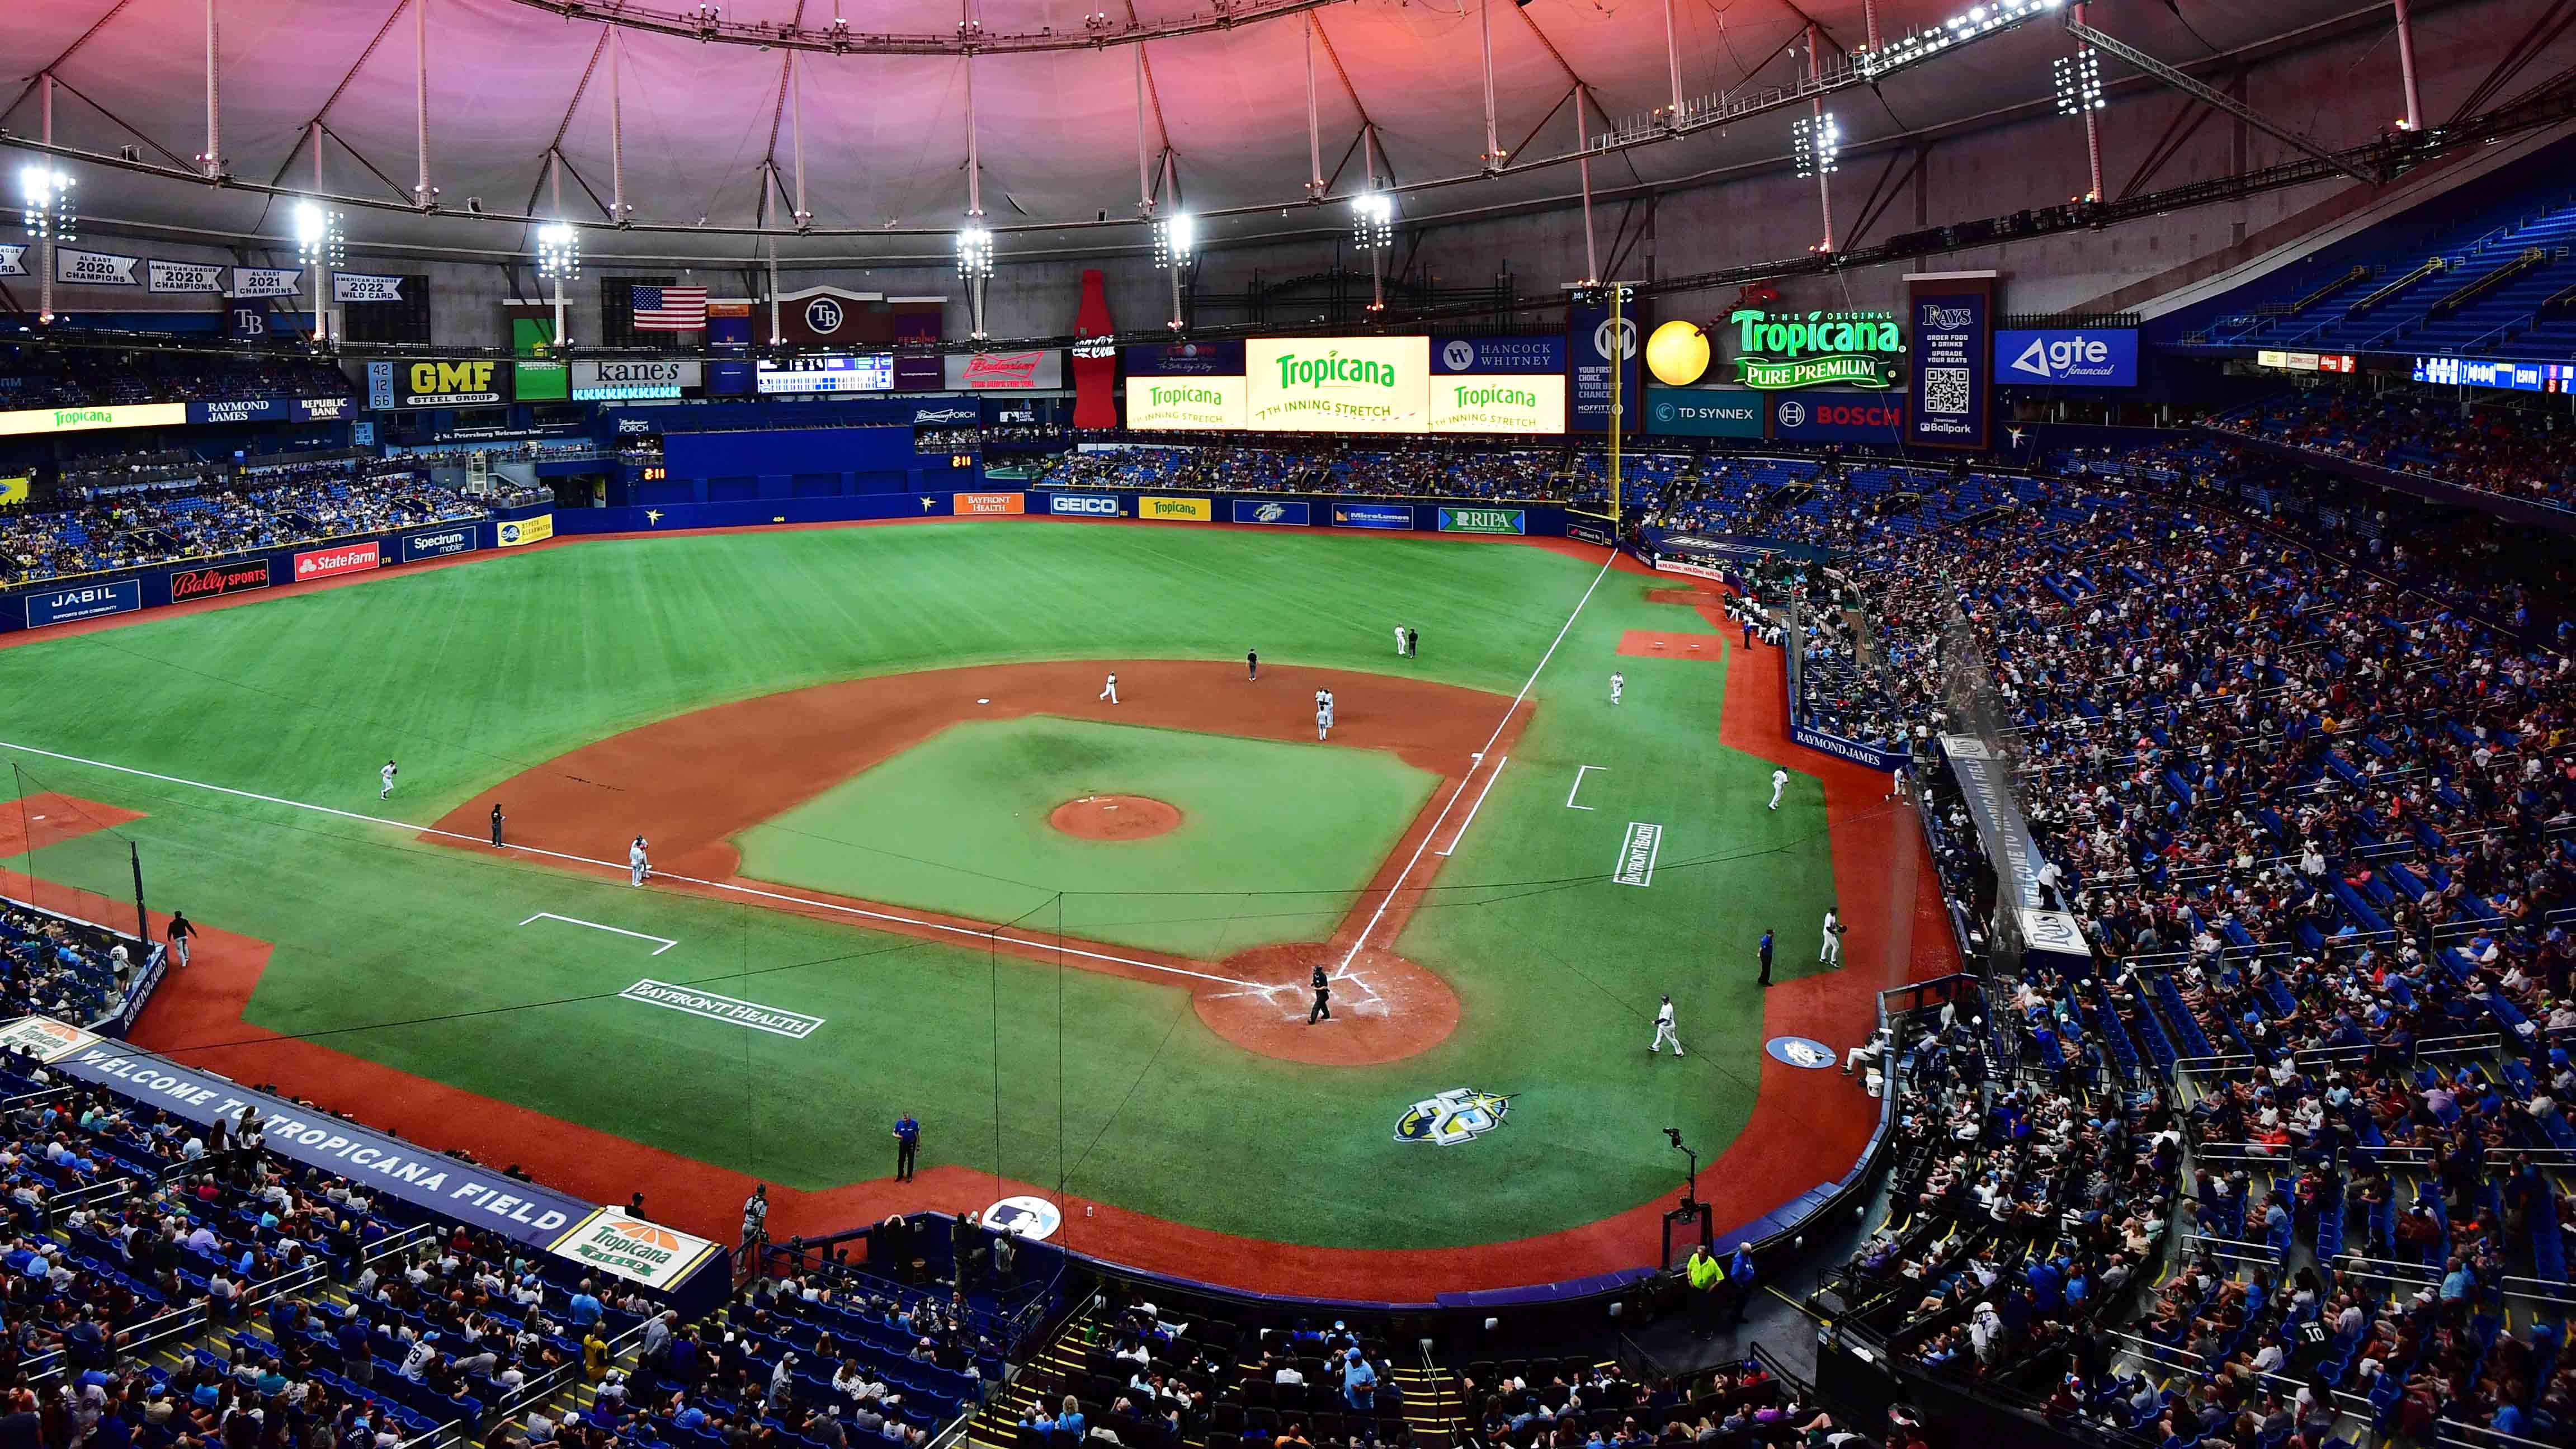 Tampa Bay Rays announce deal for new ballpark in St. Petersburg